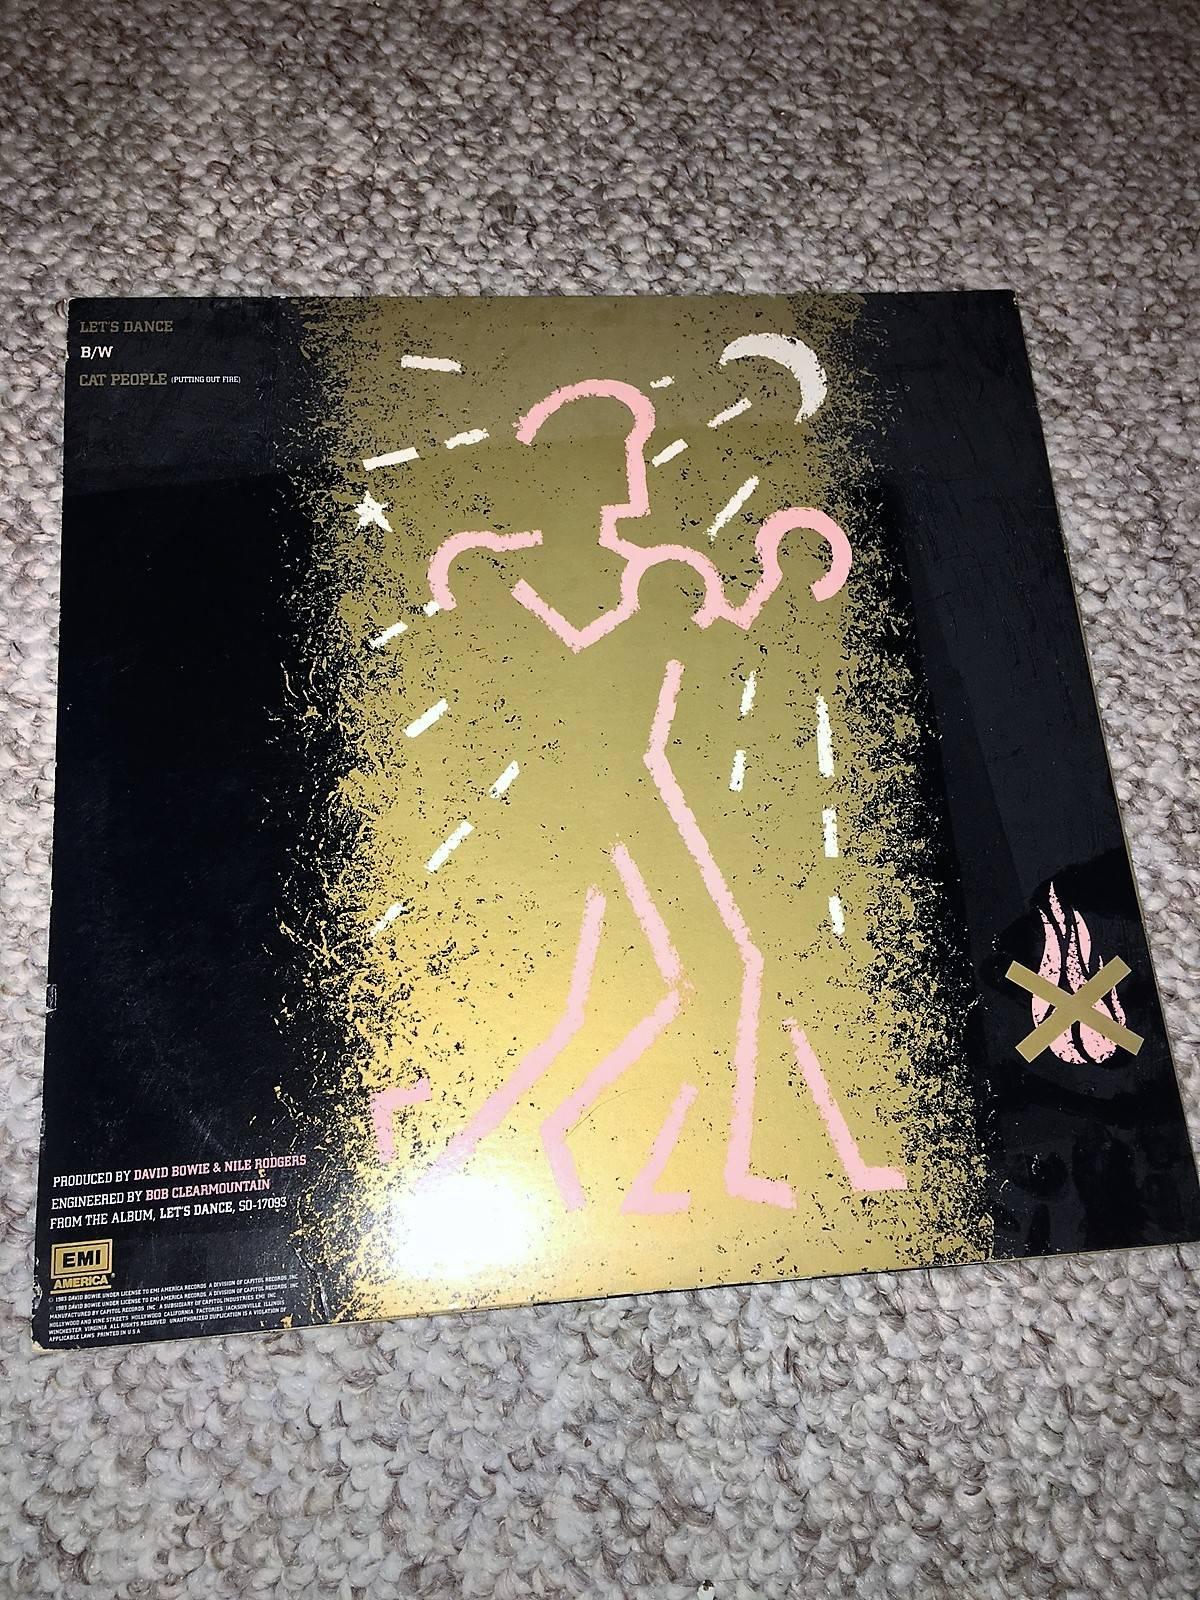 American David Bowie Autographed 'Let's Dance' Single Record Cover For Sale